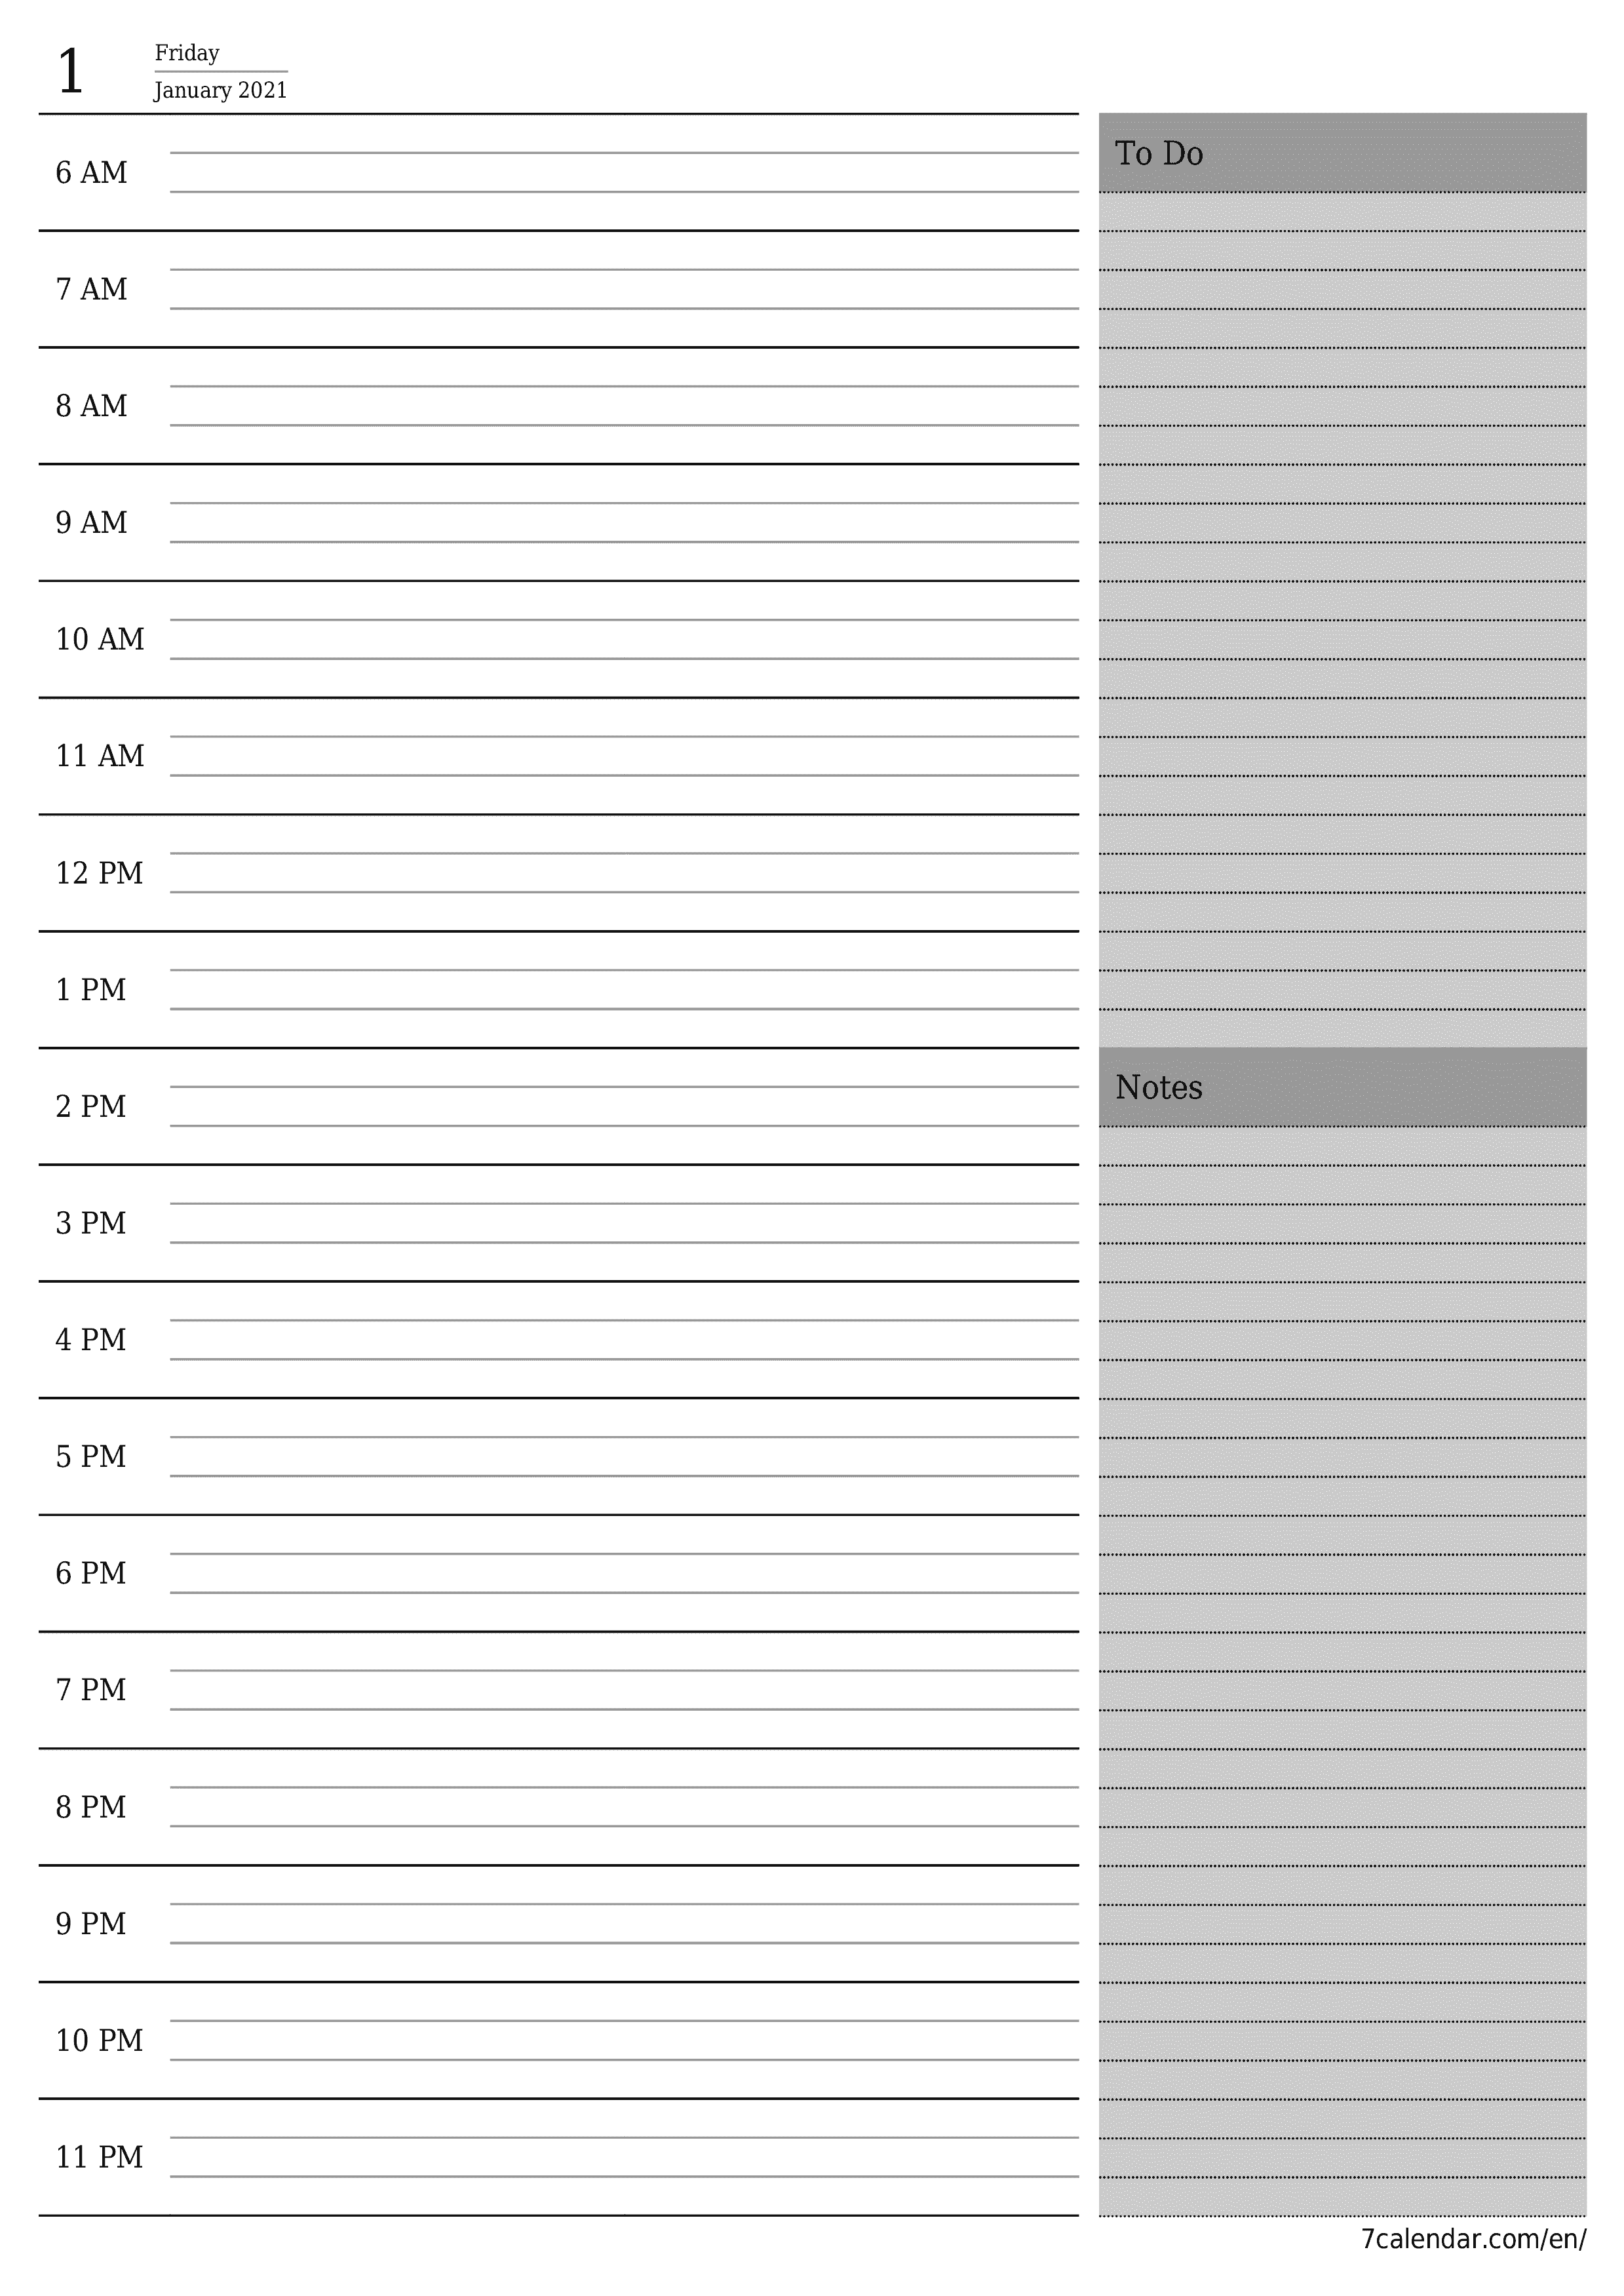 Blank daily printable calendar and planner for day January 2021 with notes, save and print to PDF PNG English